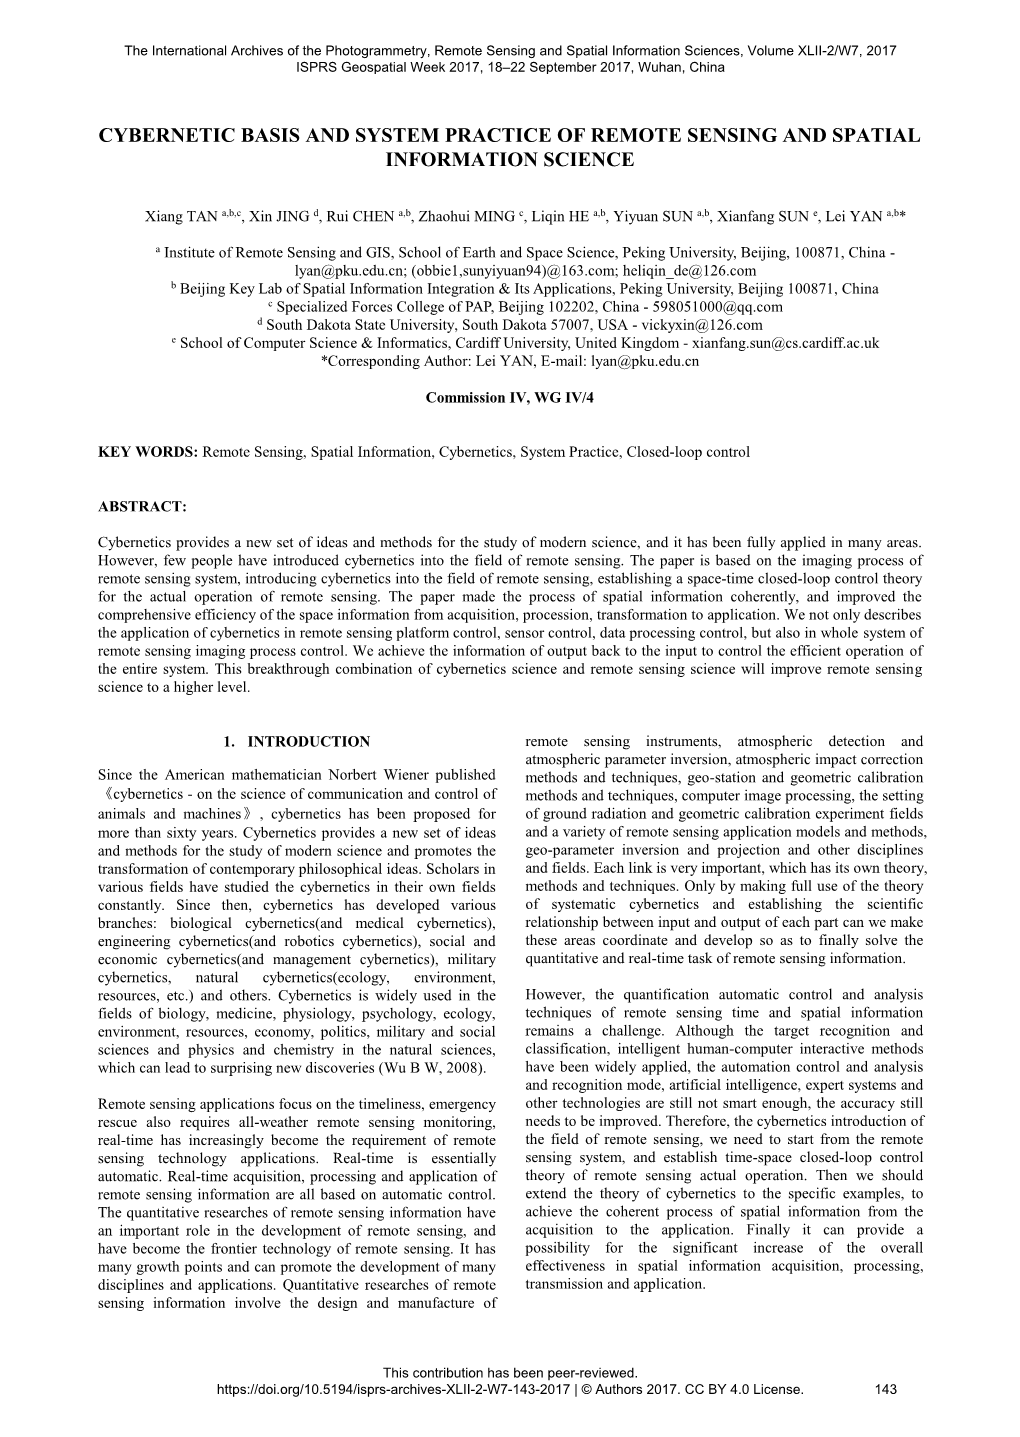 Cybernetic Basis and System Practice of Remote Sensing and Spatial Information Science